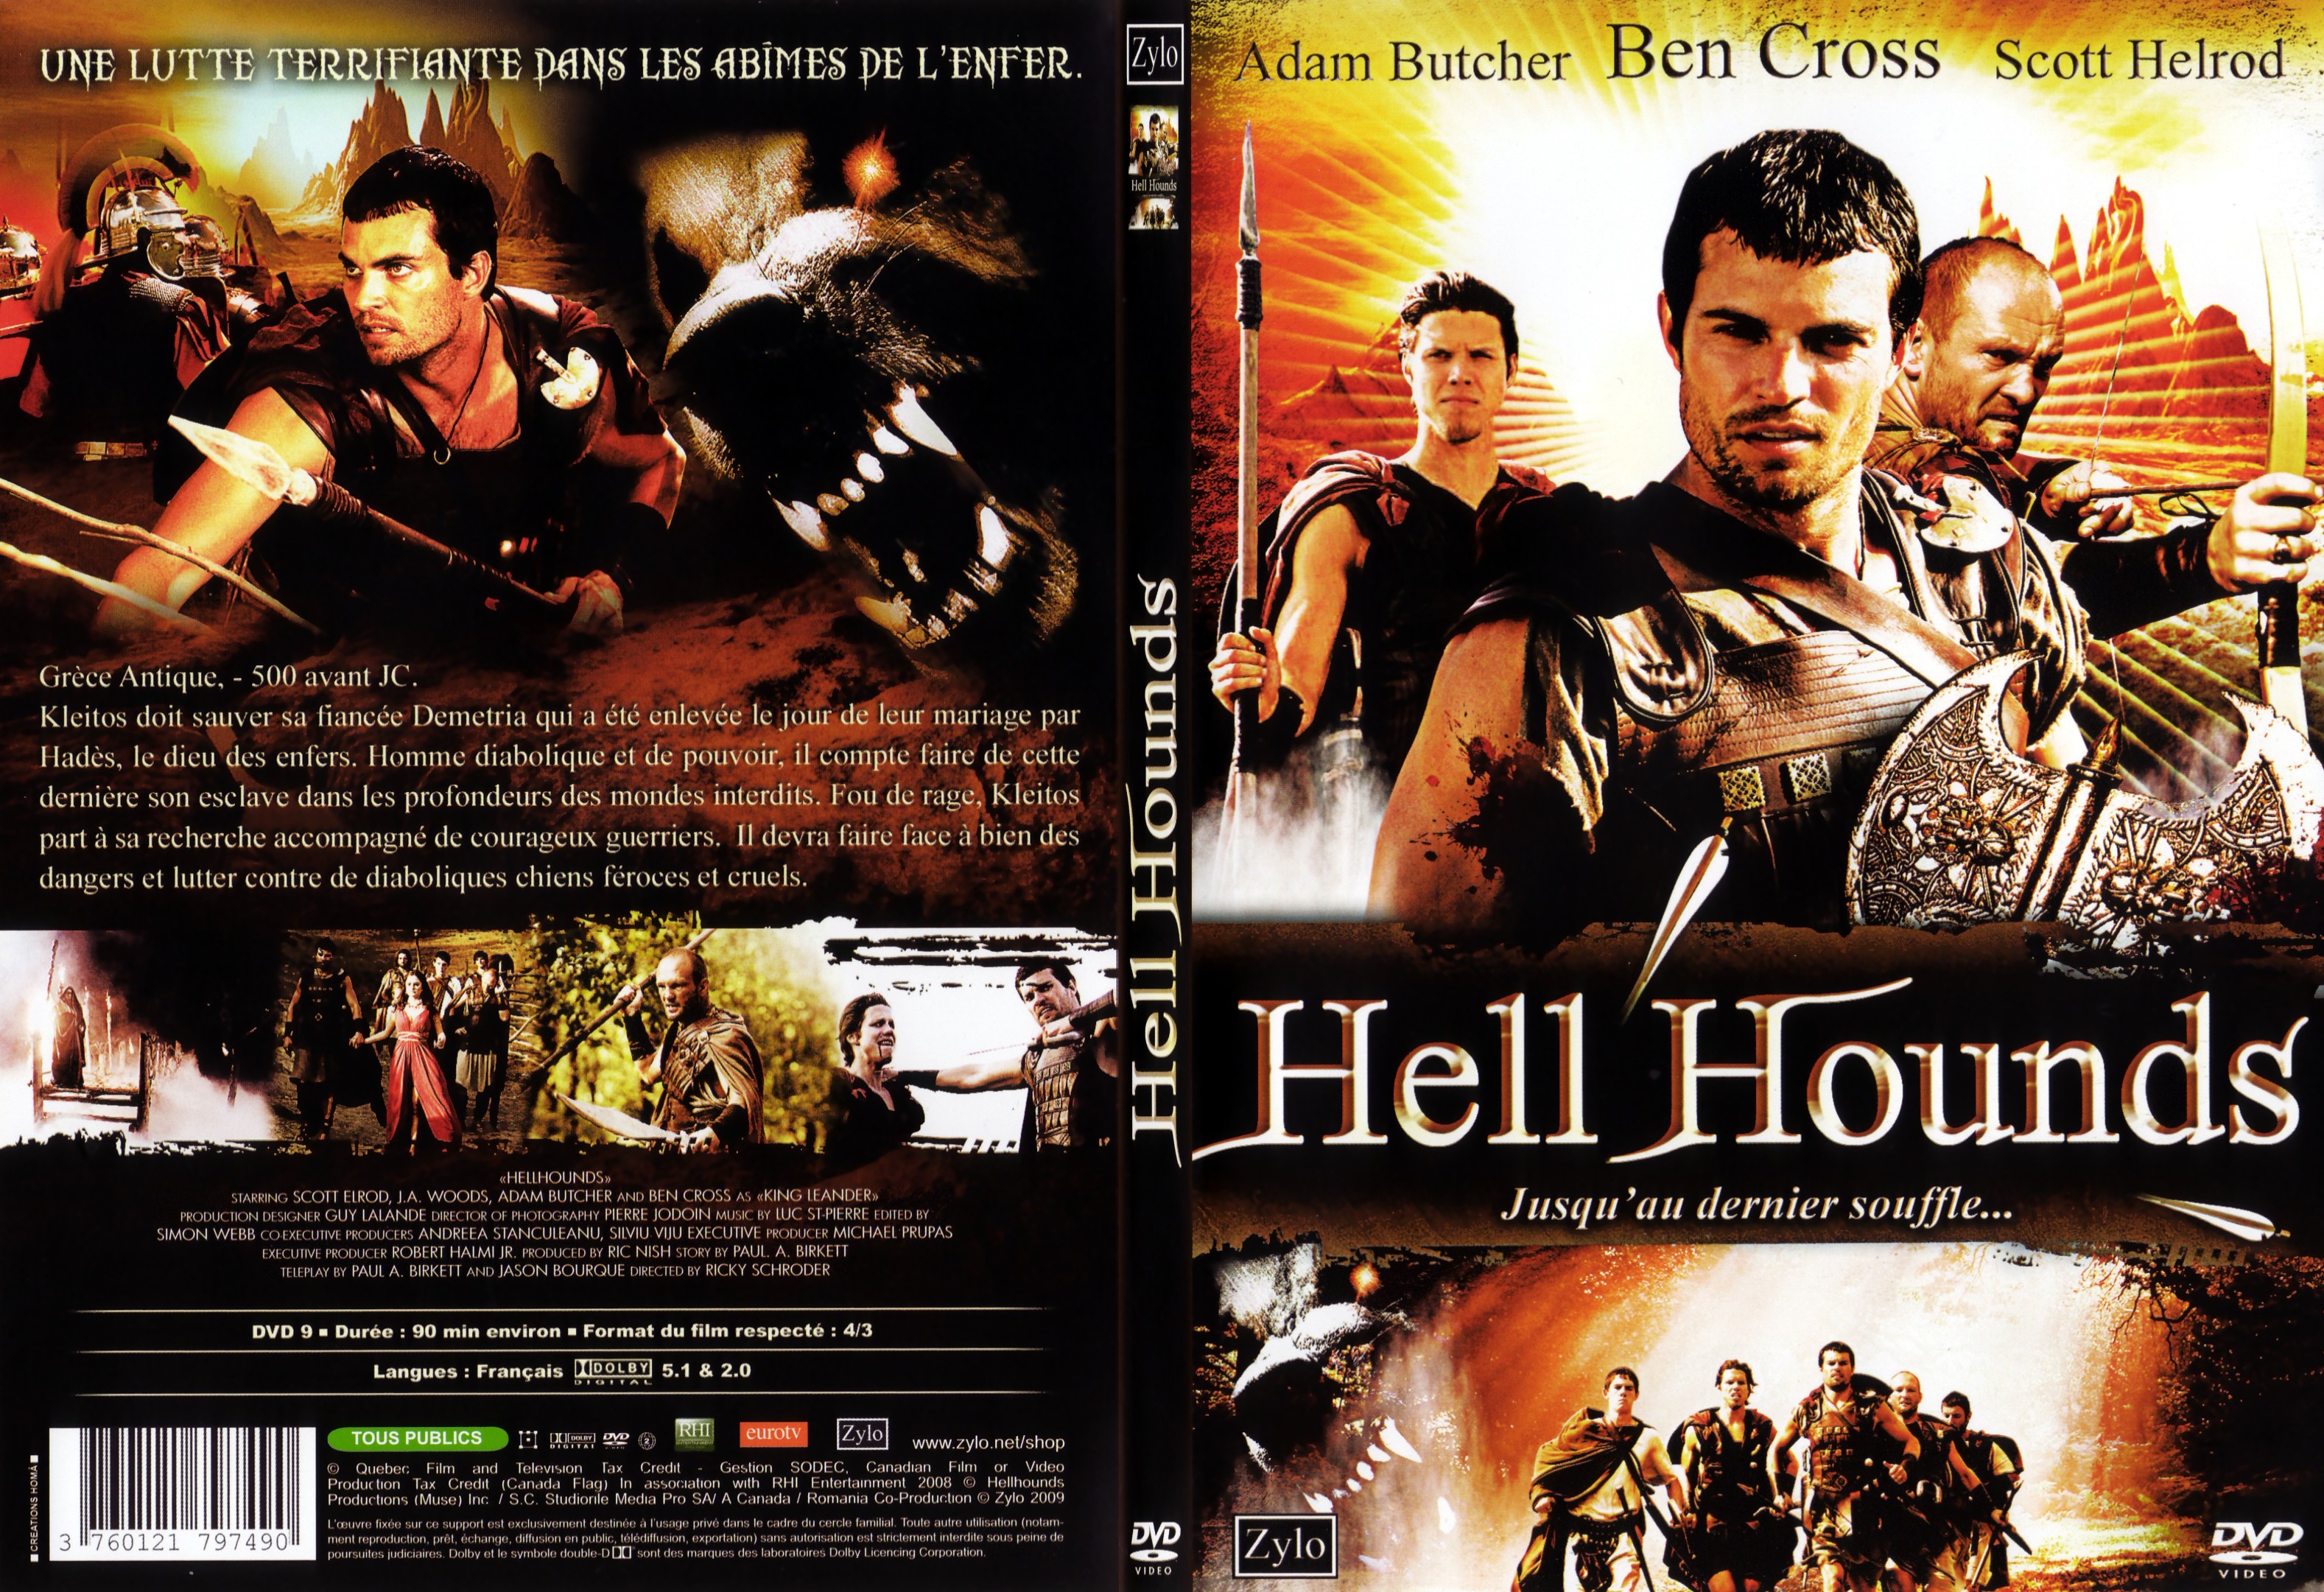 Jaquette DVD Hell hounds - SLIM